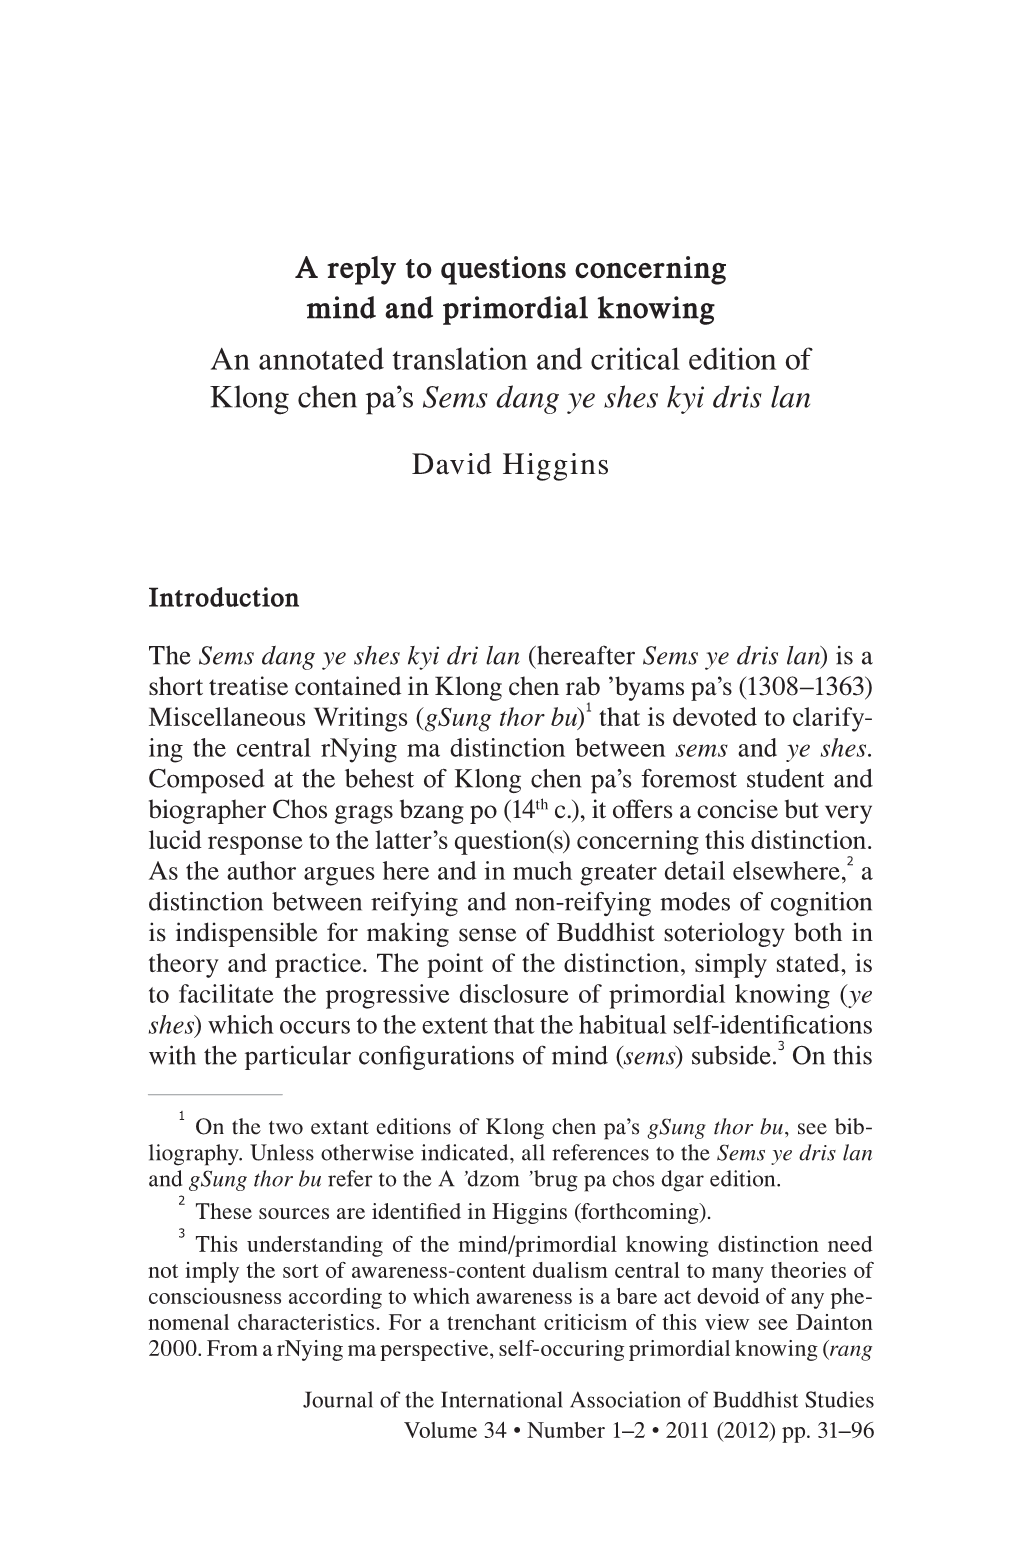 A Reply to Questions Concerning Mind and Primordial Knowing an Annotated Translation and Critical Edition of Klong Chen Pa's S